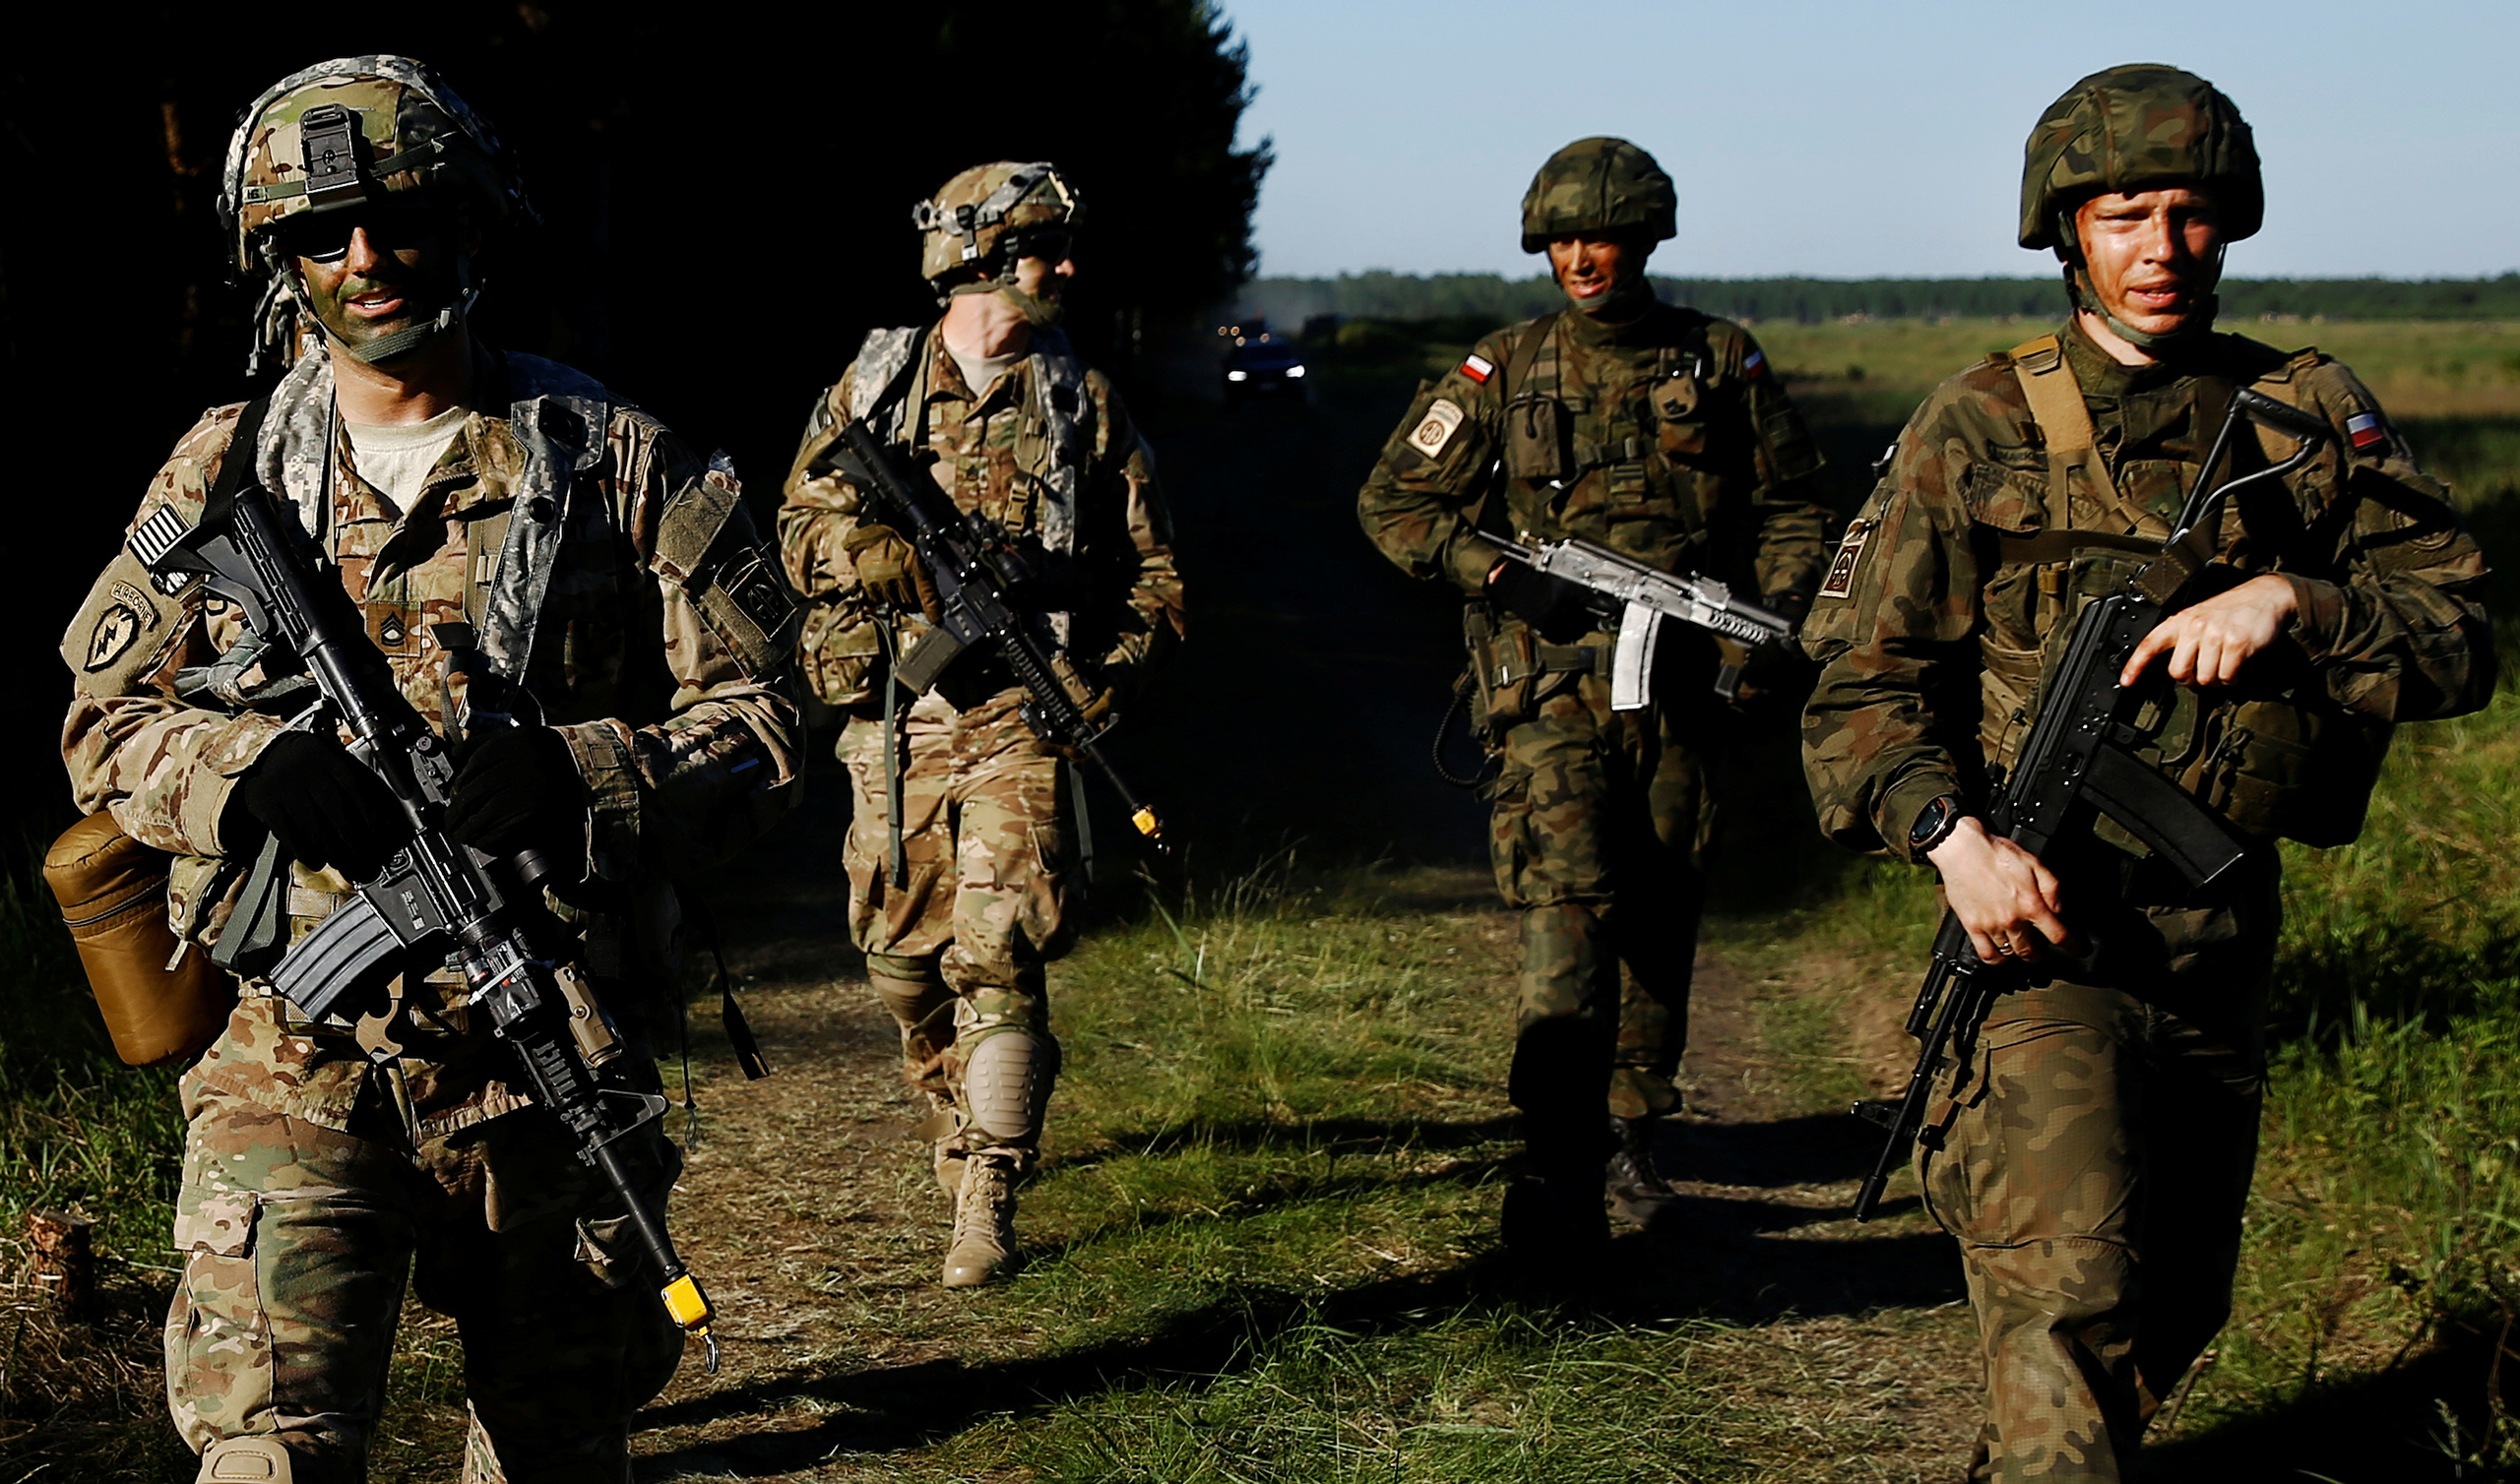 Poland's 6th Airborne Brigade soldiers walk with U.S. 82nd Airborne Division soldiers during the NATO allies' Anakonda 16 exercise near Torun, Poland, on June 7, 2016. (Kacper Pempel—Reuters)